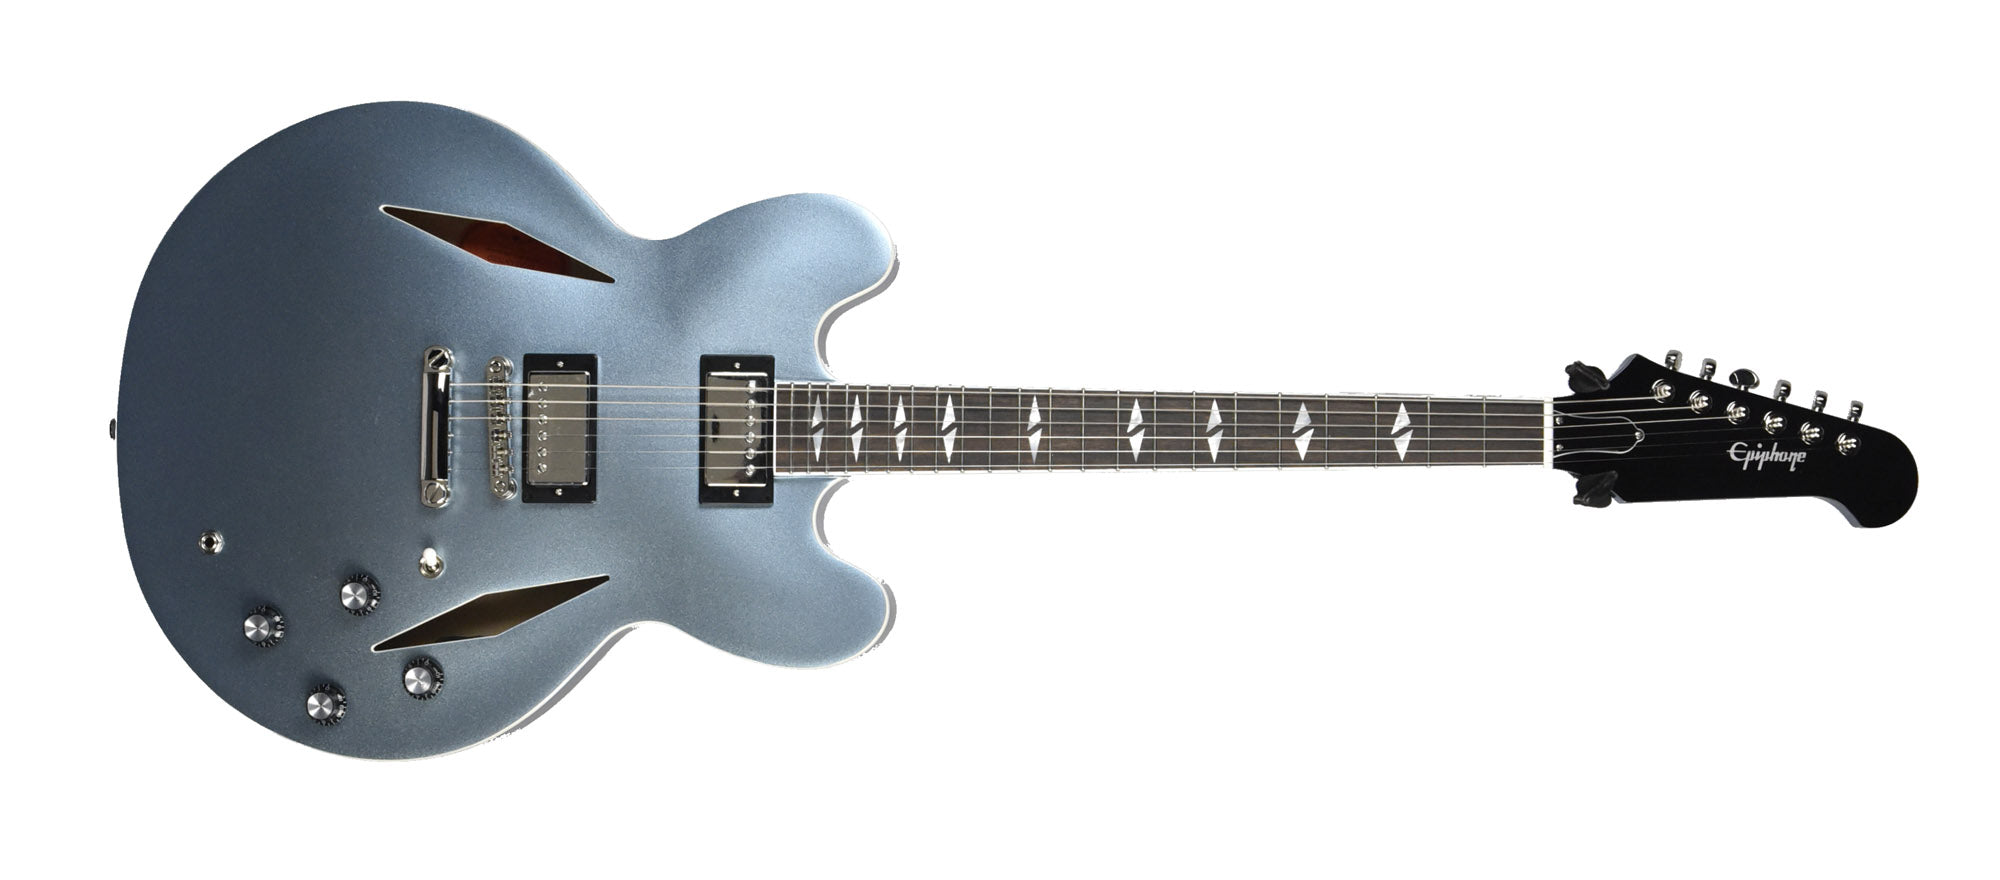 Epiphone Dave Grohl DG-335 Semi-Hollow in Pelham Blue 24031510060 